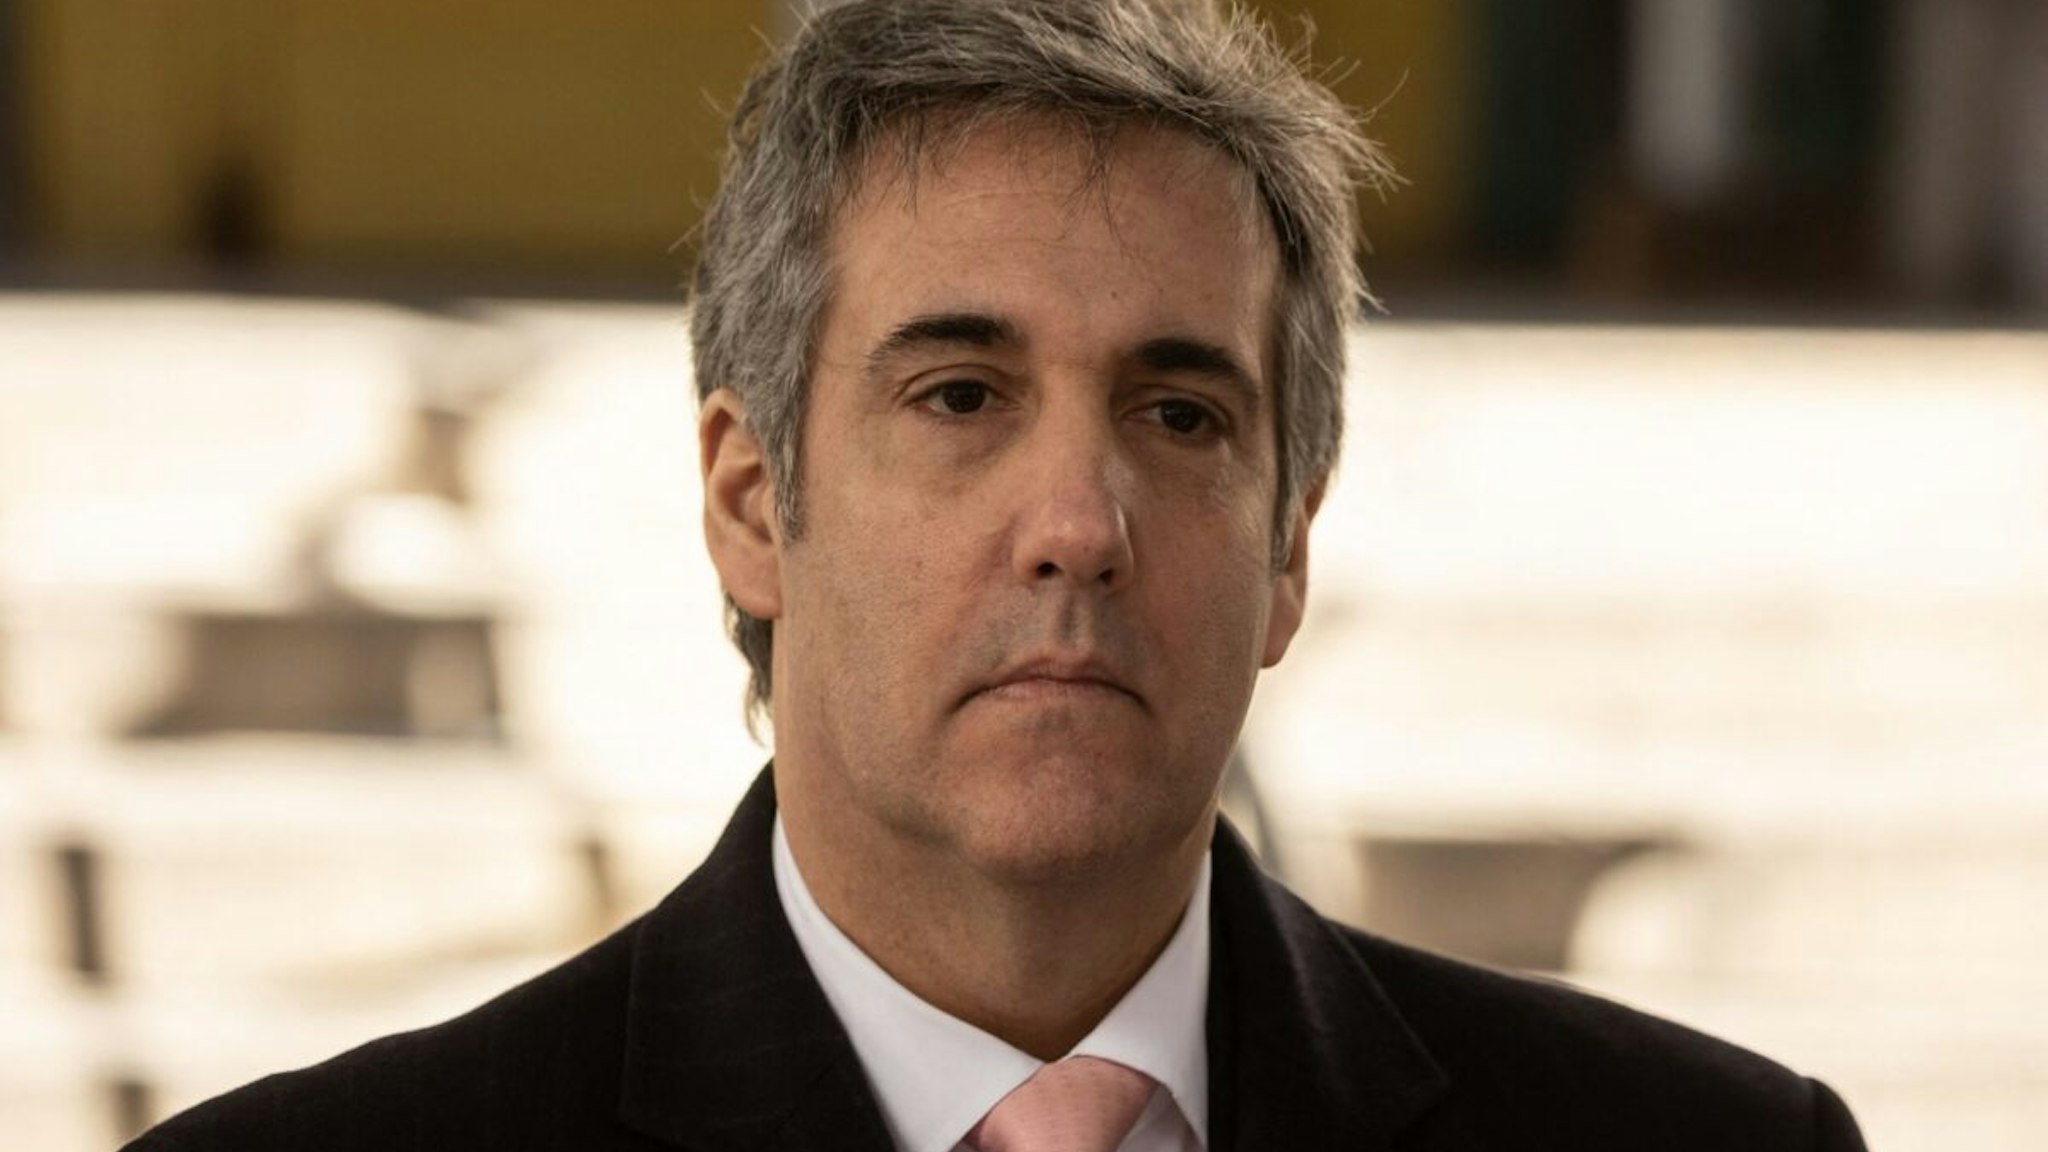 Former Trump Attorney Michael Cohen leaves the district attorney's office after completing his testimony before a grand jury on March 15, 2023 in New York.